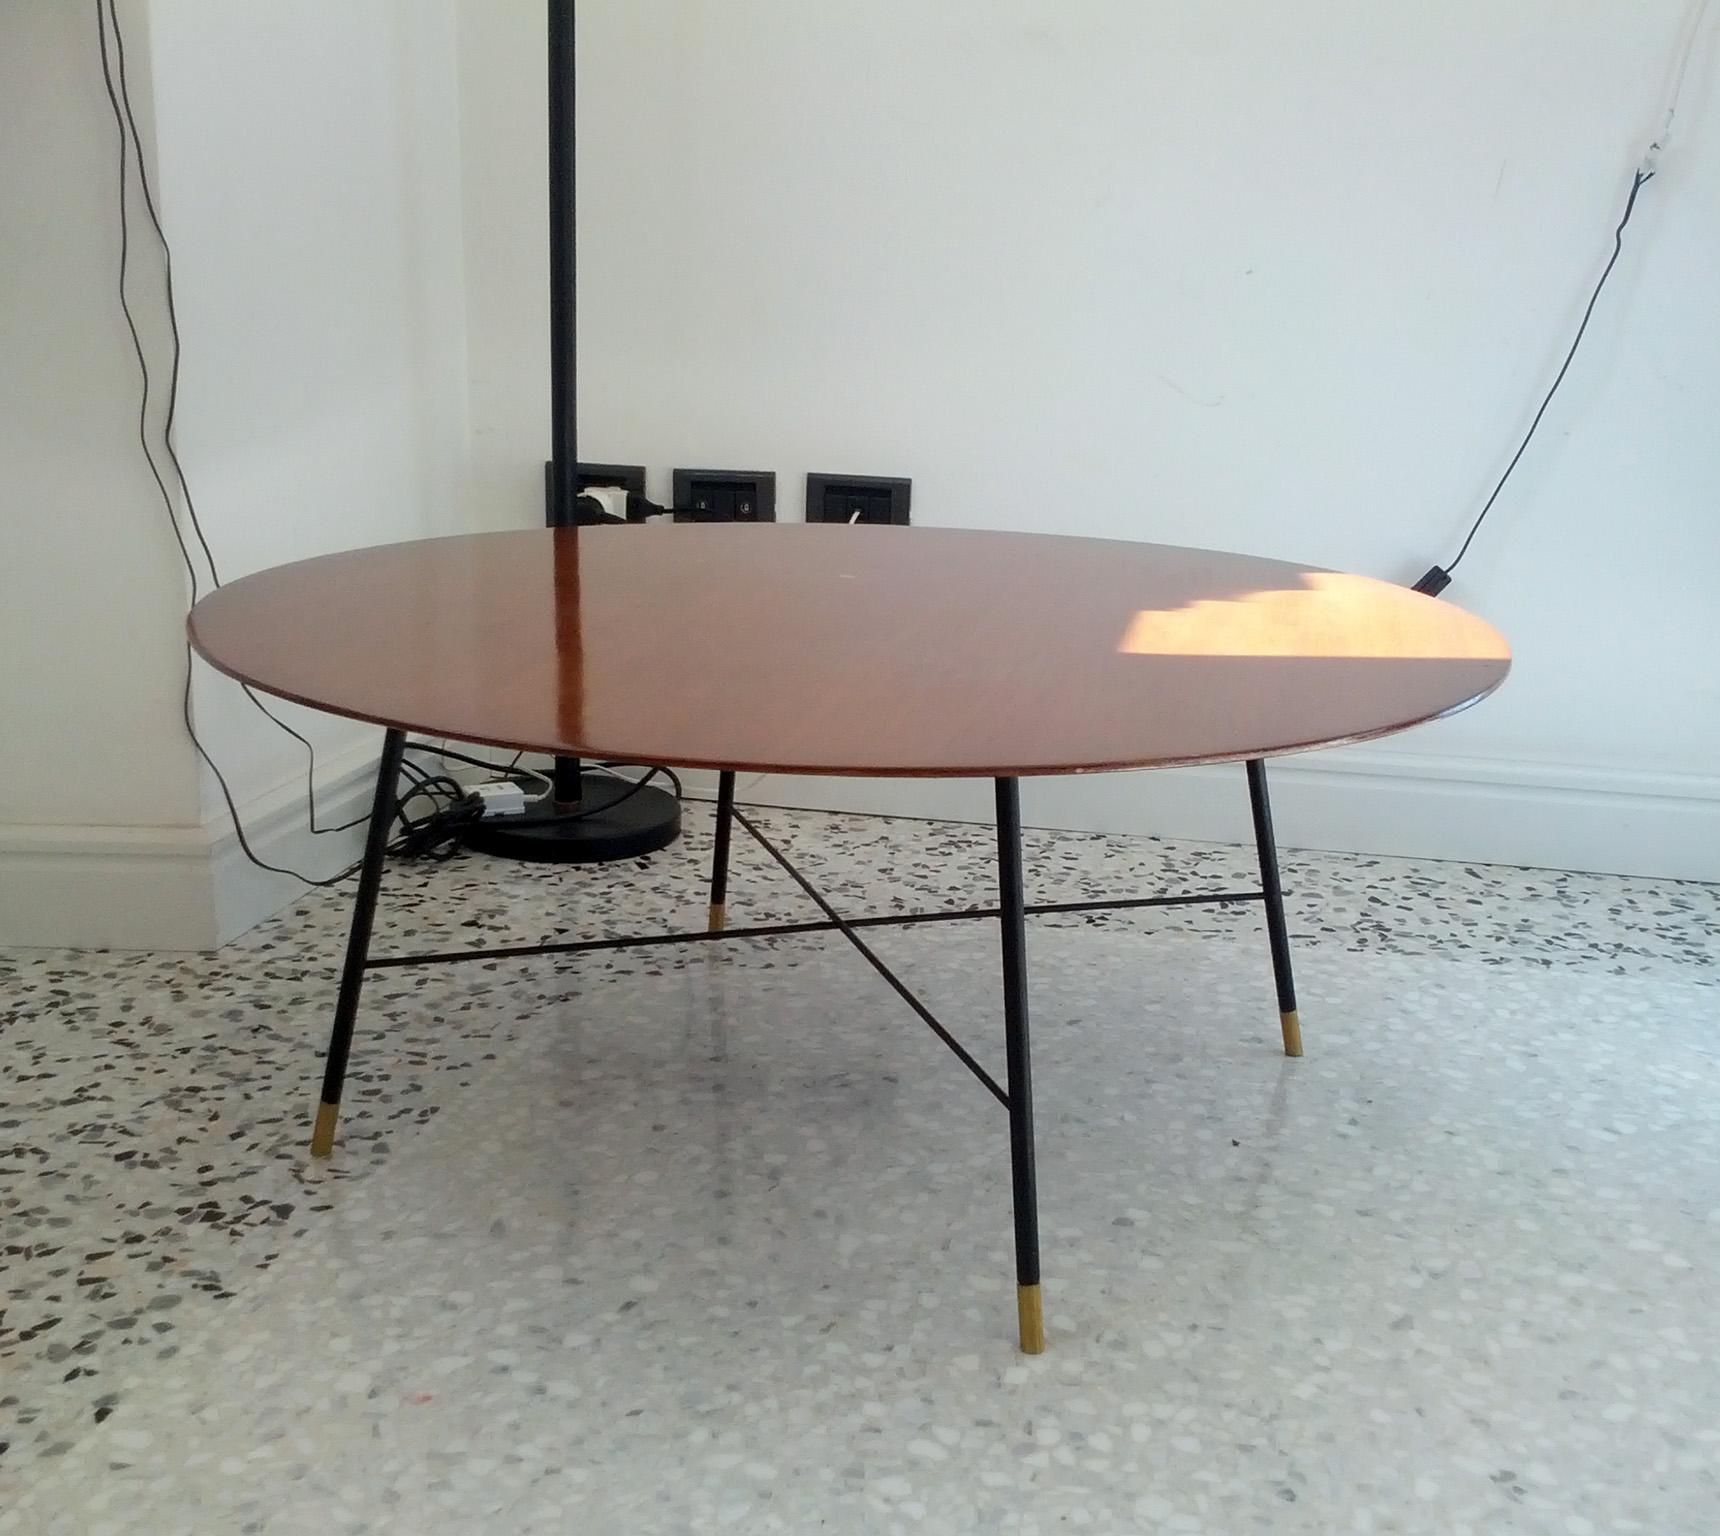 Mid-20th Century Ico Parisi Round Low Table with Mahogany Top and Brass Feet, Cassina Milano 1955 For Sale